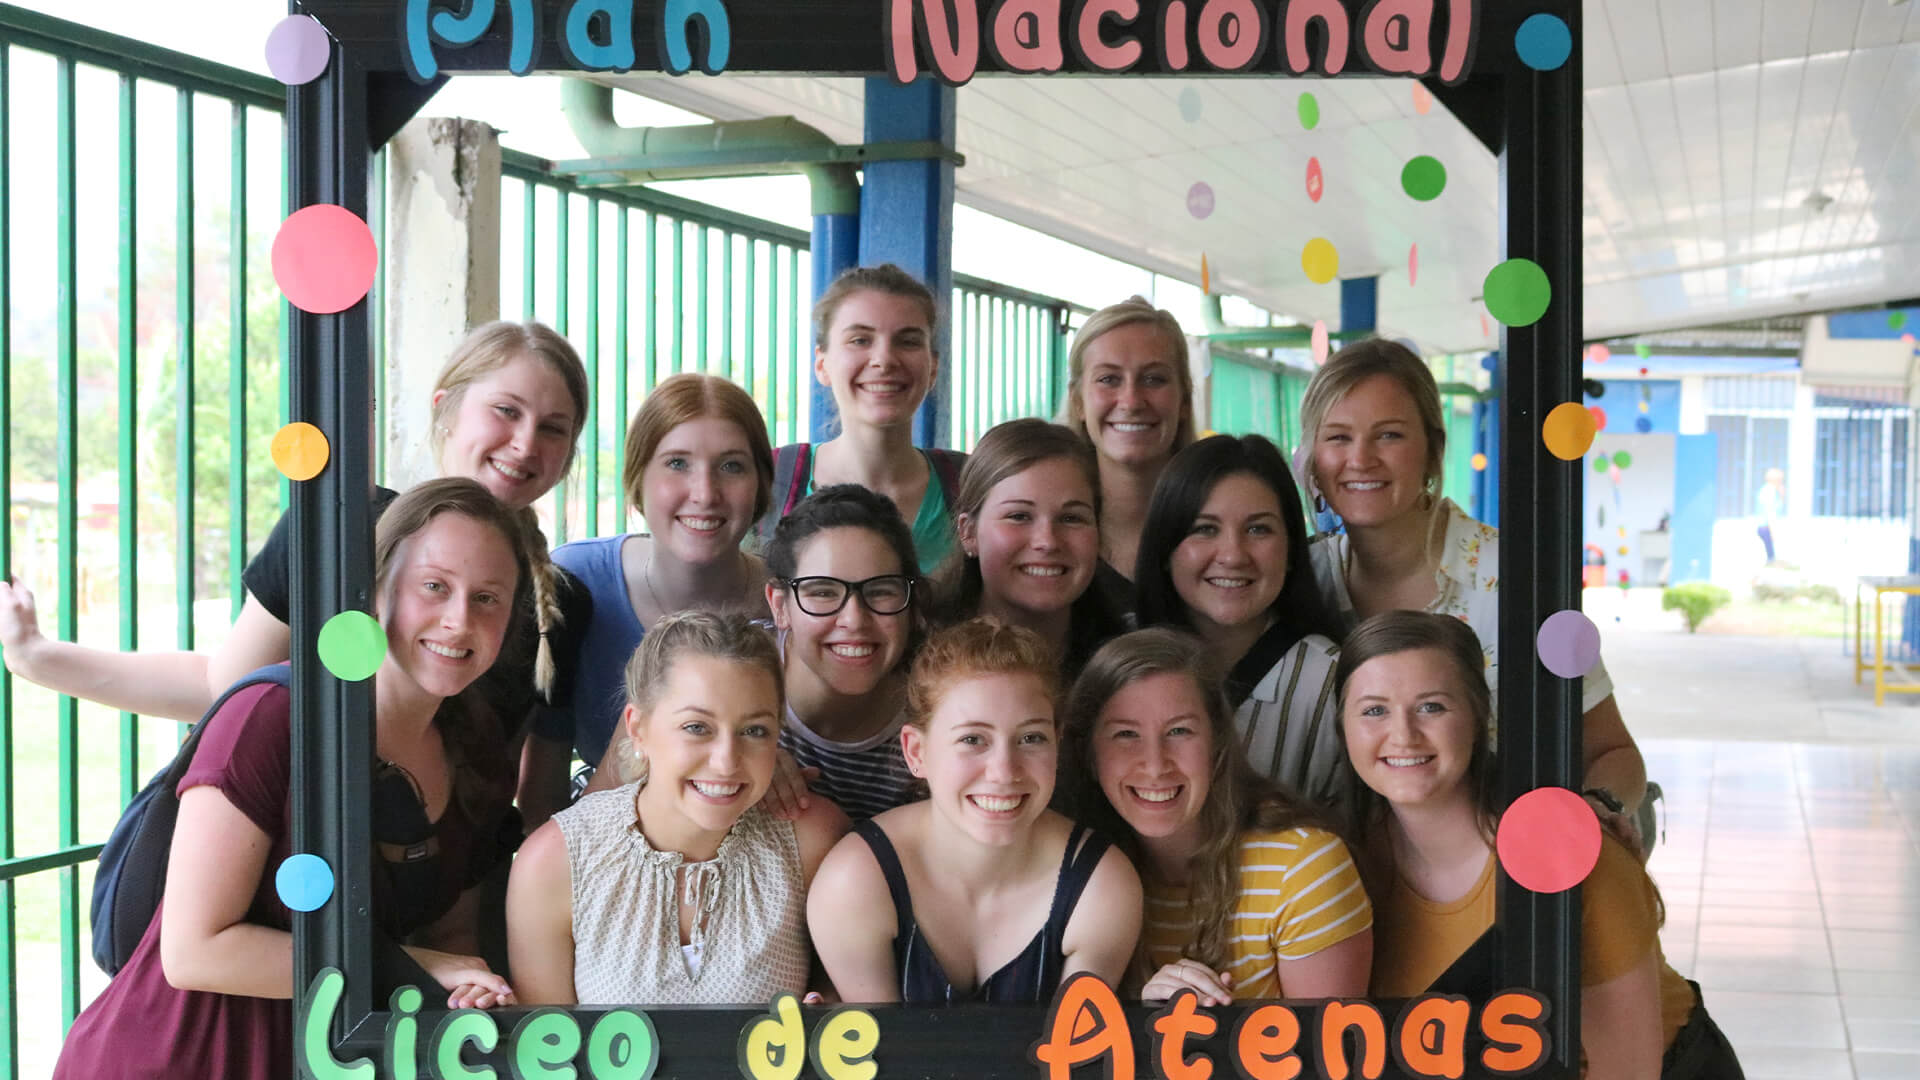 Special ed student teachers pose for a photo in an oversized frame at Liceo de Atenas, Costa Rica.